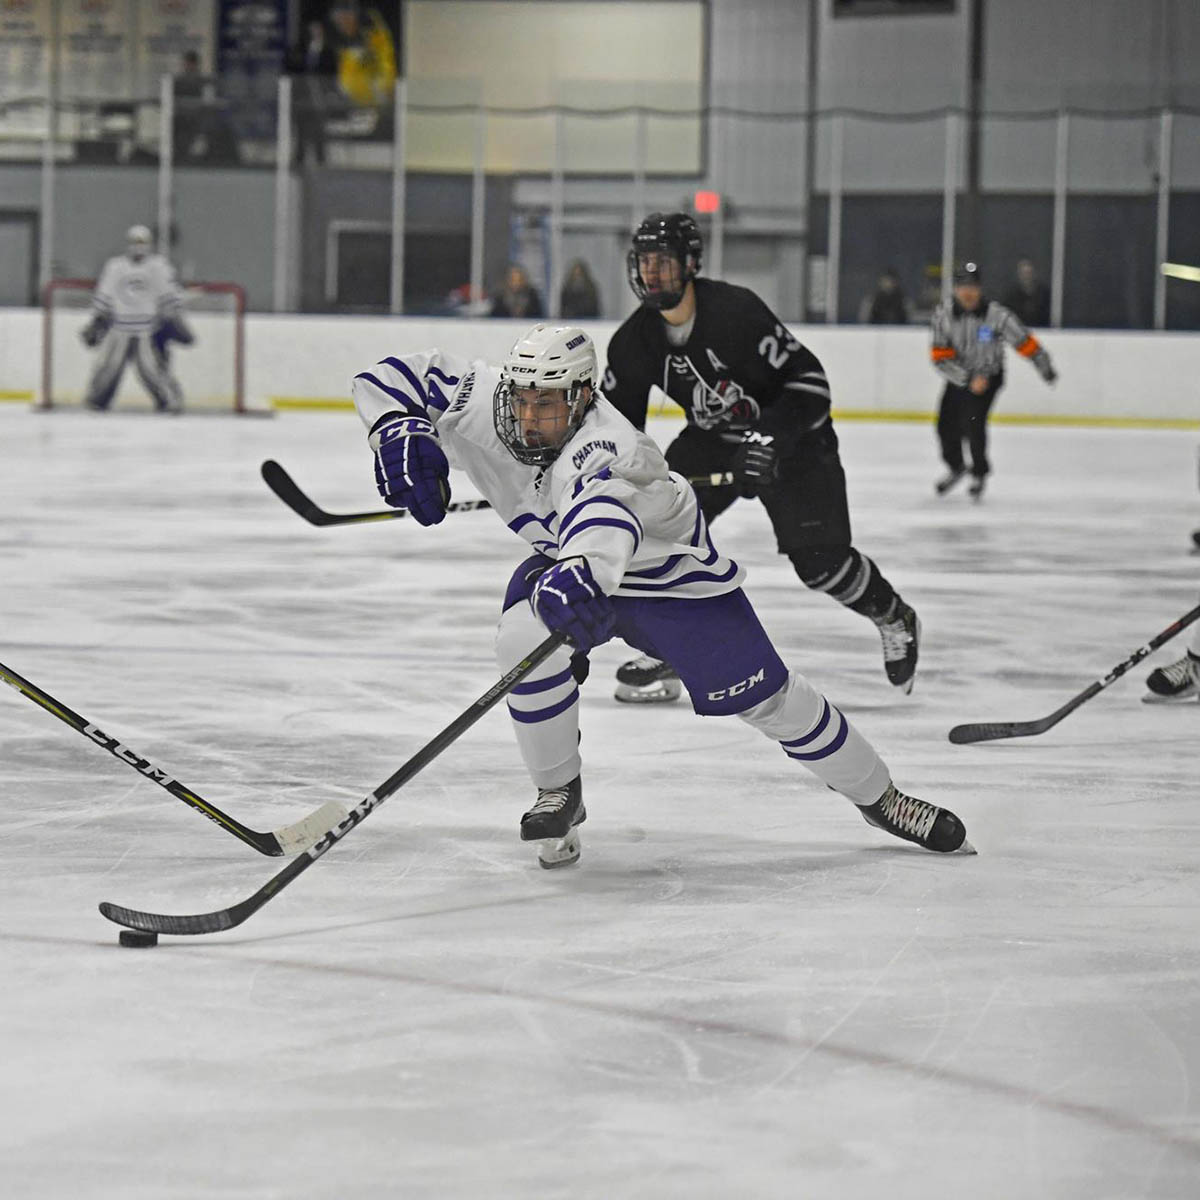 A Chatham hockey player skates with the puck during a game, with an opponent behind